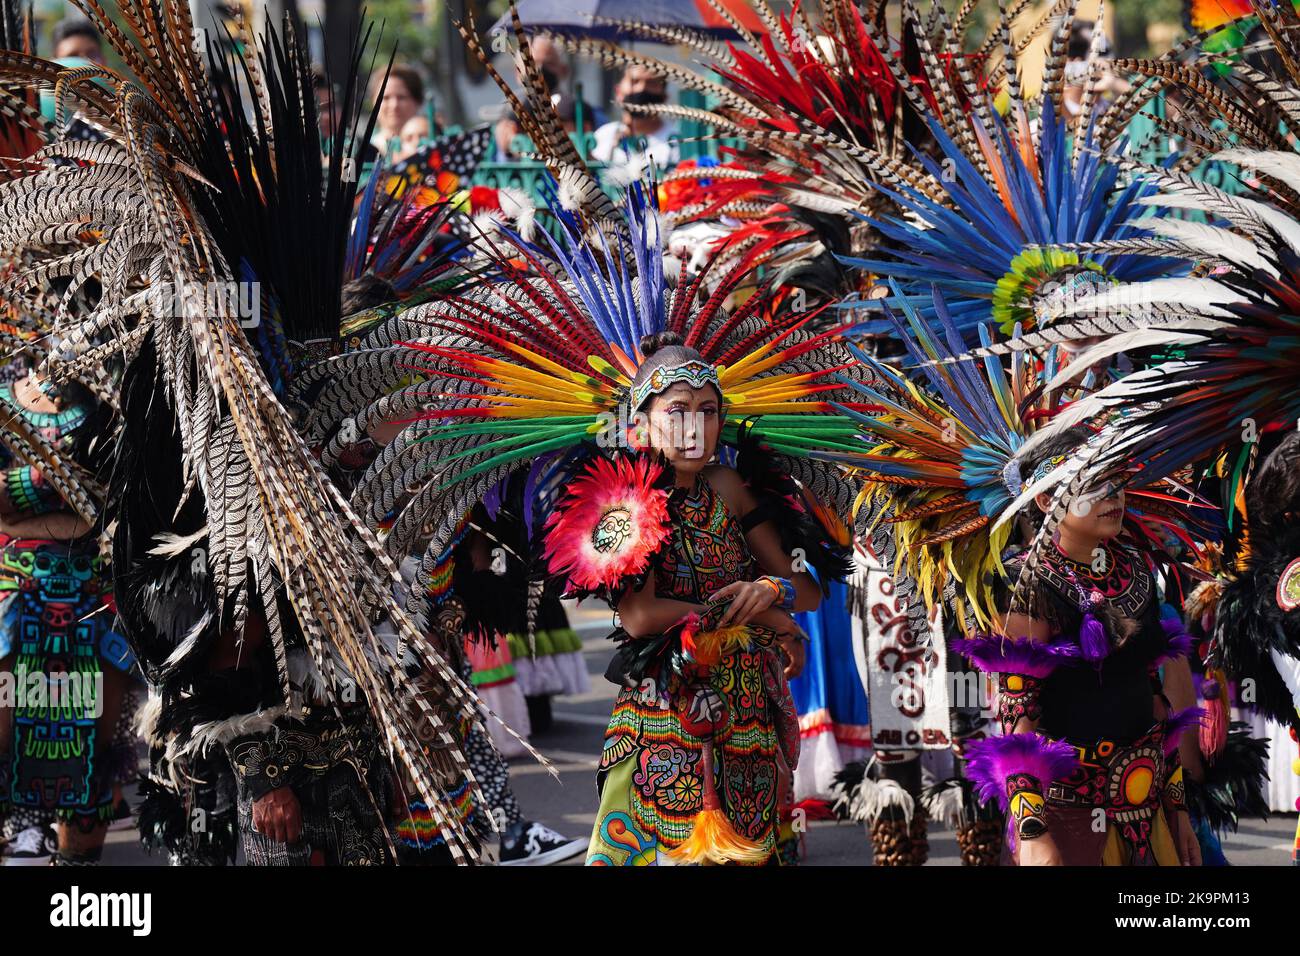 Mexico City, Mexico. 29th Oct, 2022. Indigenous costumed performers wait in the sun for the start of the Grand Parade of the Dead to celebrate Dia de los Muertos holiday on Paseo de la Reforma, October 29, 2022 in Mexico City, Mexico. Credit: Richard Ellis/Richard Ellis/Alamy Live News Stock Photo